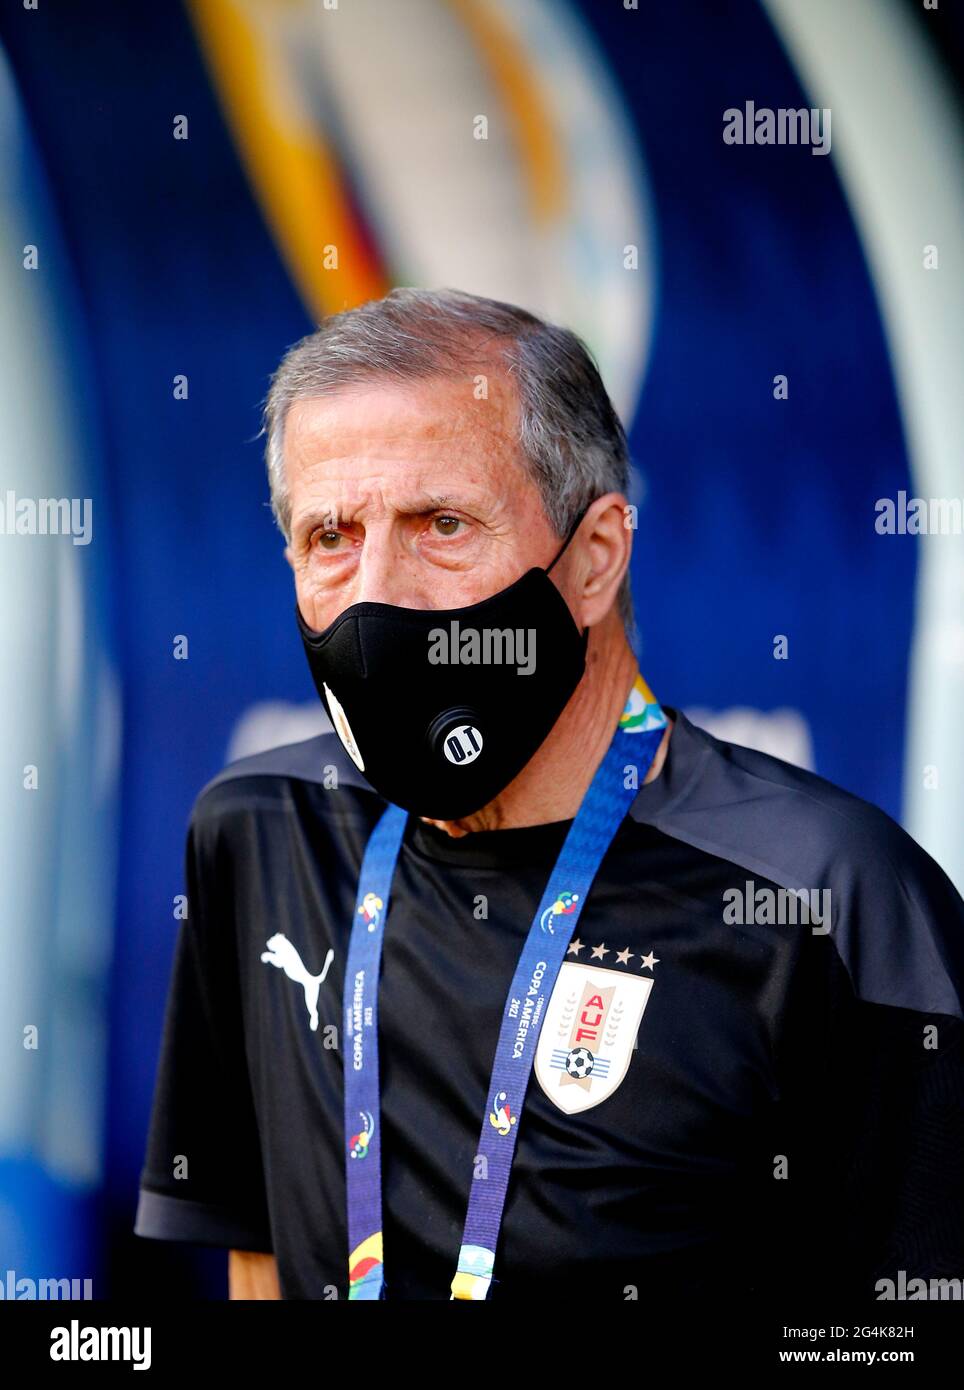 CUIABA, BRAZIL - JUNE 21: Oscar Tabarez Head Coach of Uruguay looks on ,during the match between Uruguay and Chile as part of Conmebol Copa America Brazil 2021 at Arena Pantanal on June 21, 2021 in Cuiaba, Brazil. (MB Media) Stock Photo